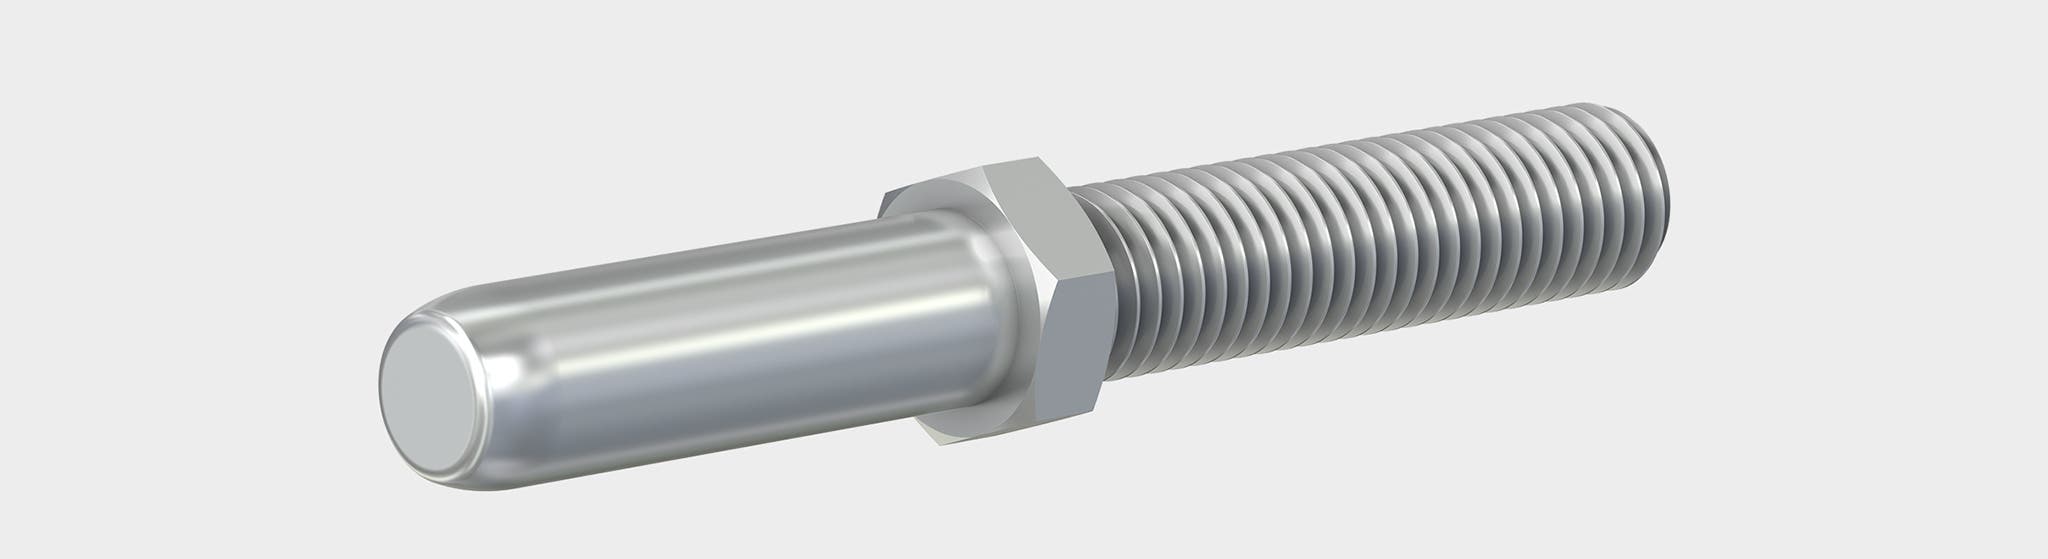 Header image with plugs S...N with thread termination for cable lugs, busbars or contact blocks.